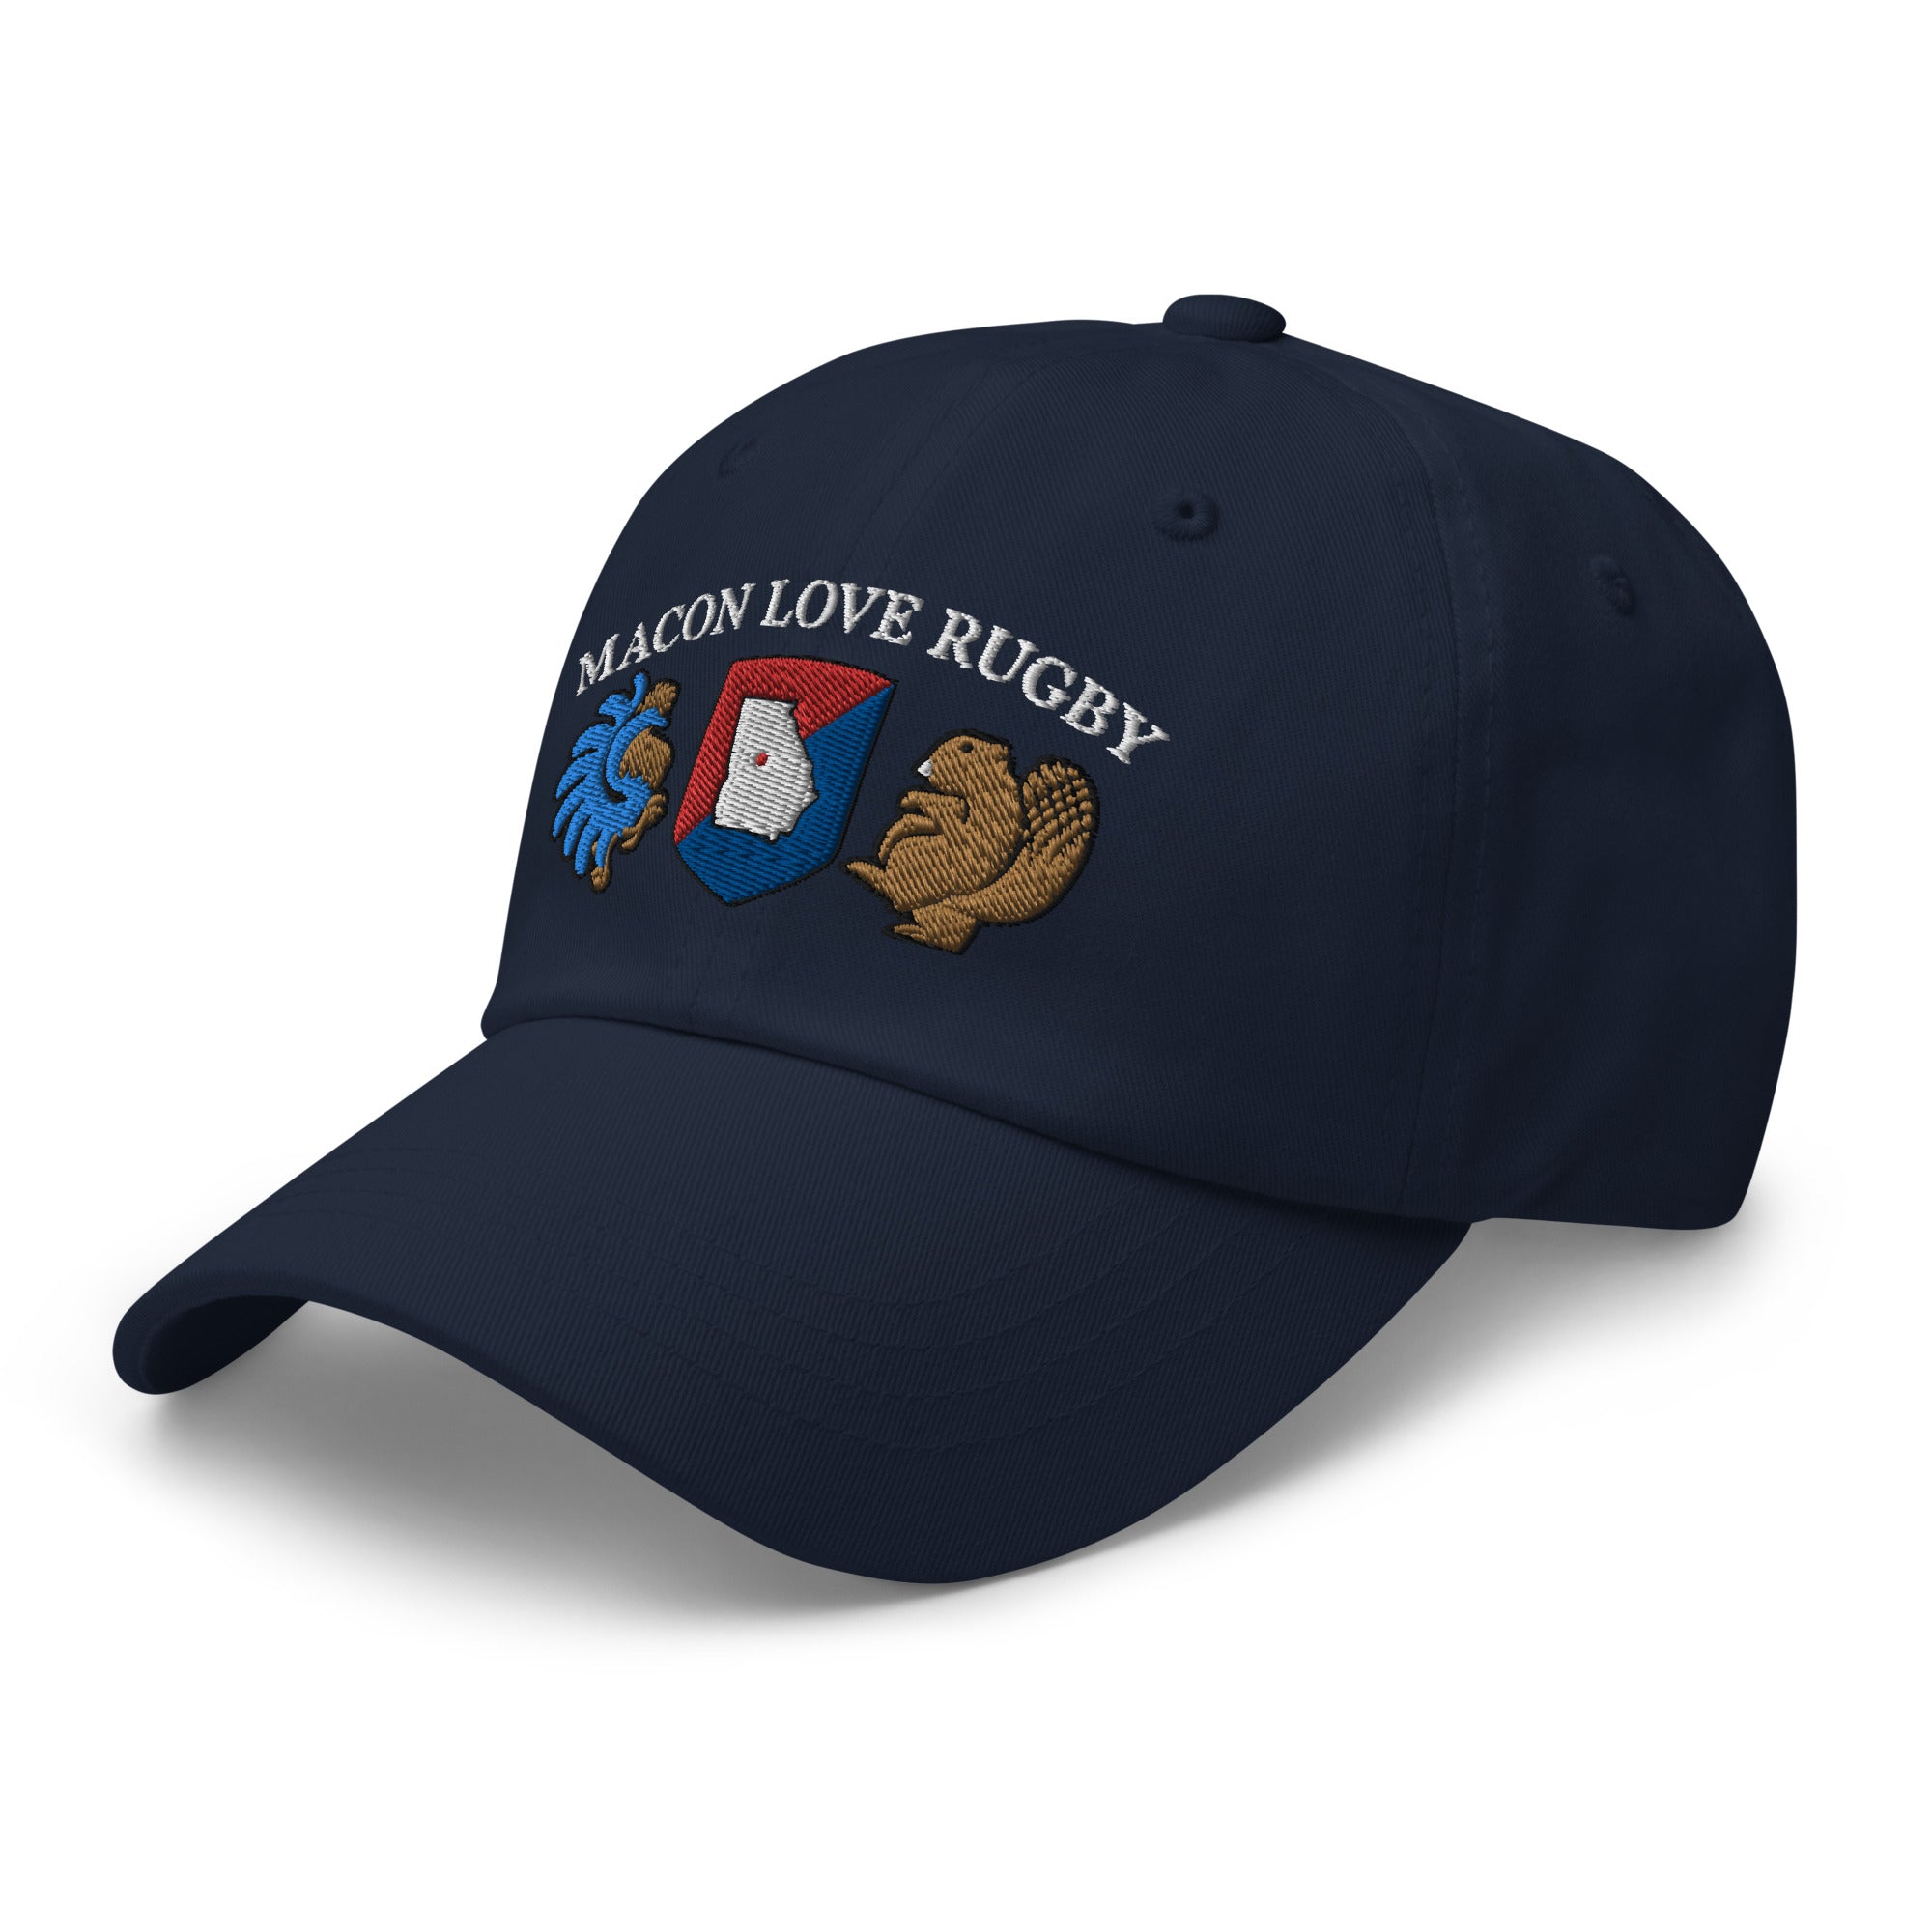 Rugby Imports Macon Love Rugby Adjustable Hat